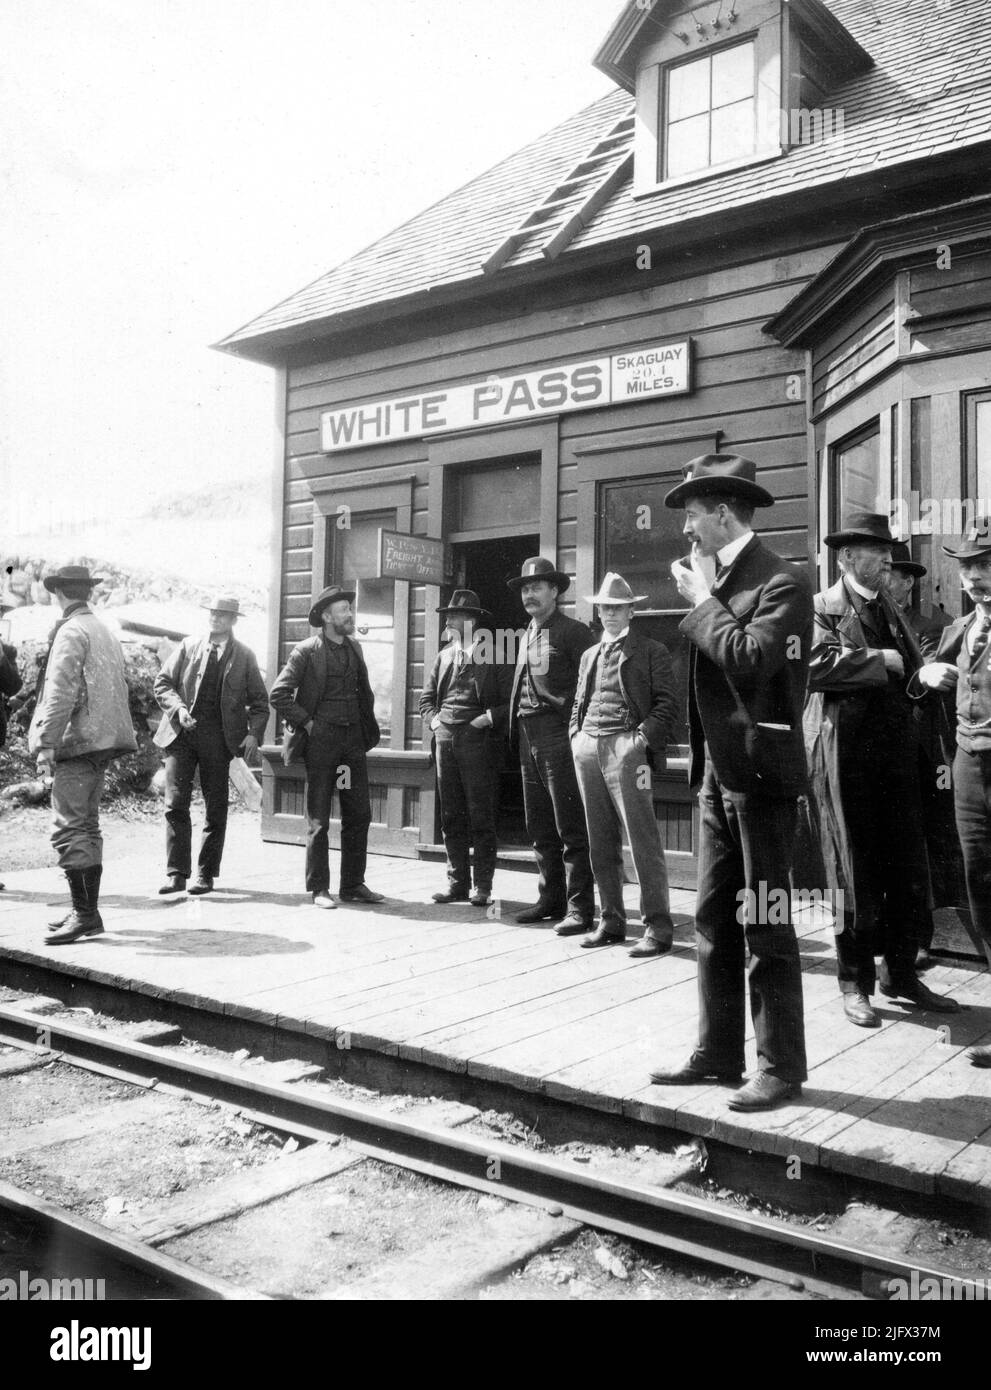 Historical image. Klondike Goldrush, 1900. Gentlemen and prospectors standing at the White Pass & Yukon Railroad Station in Alaska. The station was a main point for prospectors to head off to the goldfields of Alaska and Yukon which, unbeknownst to them, already had seen most of the good Klondike claims staked out.The gentleman in white hat is Sidney Paige, a geologist of the US Geological Survey who was also exploring the area and inventorying the minerals for the USGS. Credit: USGS. Stock Photo